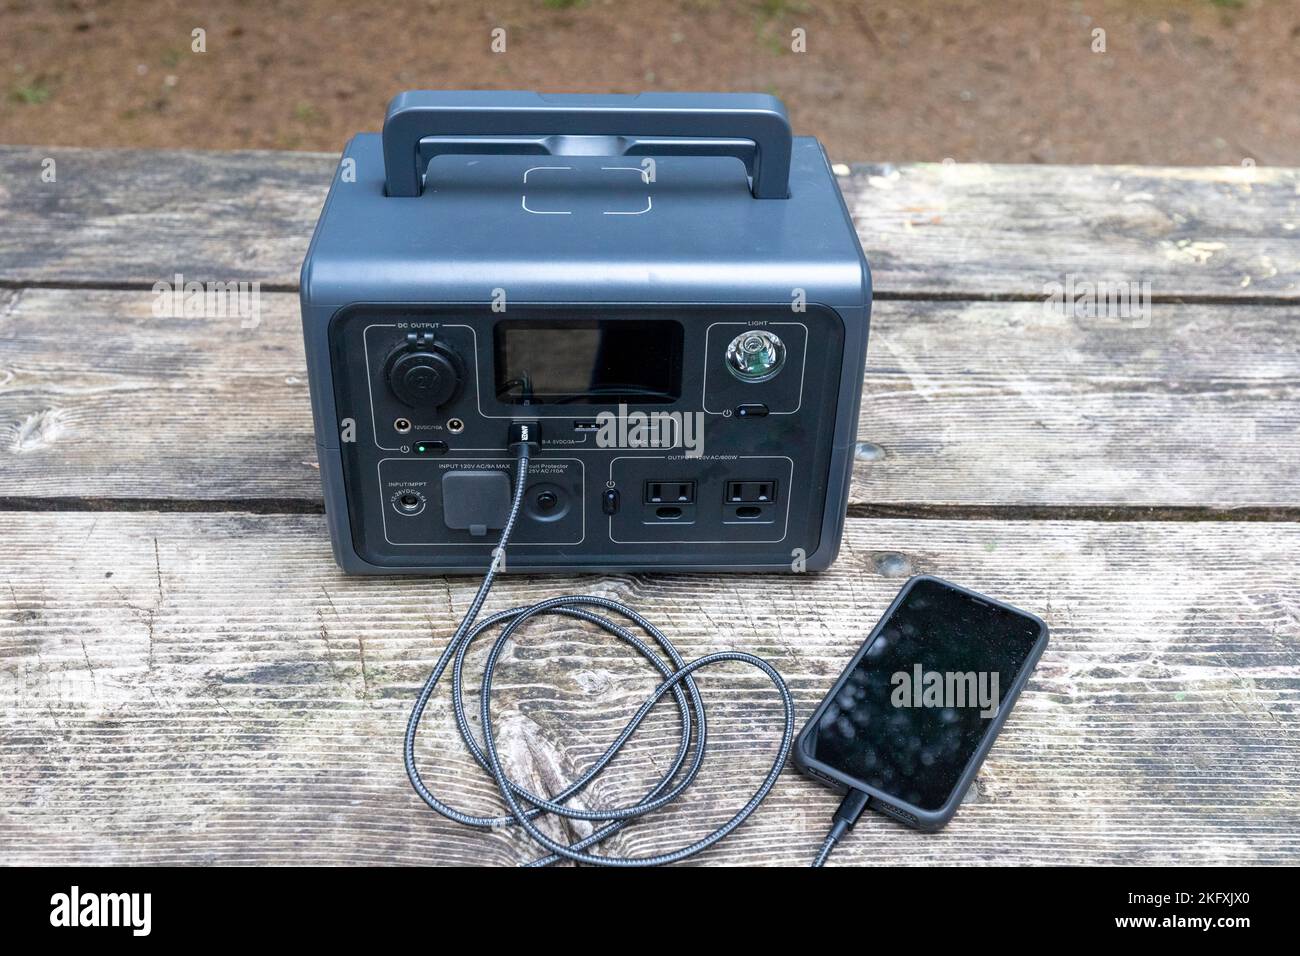 Portable Power Generator charging a smartphone - small emergency generator or good for car camping vanlife Stock Photo